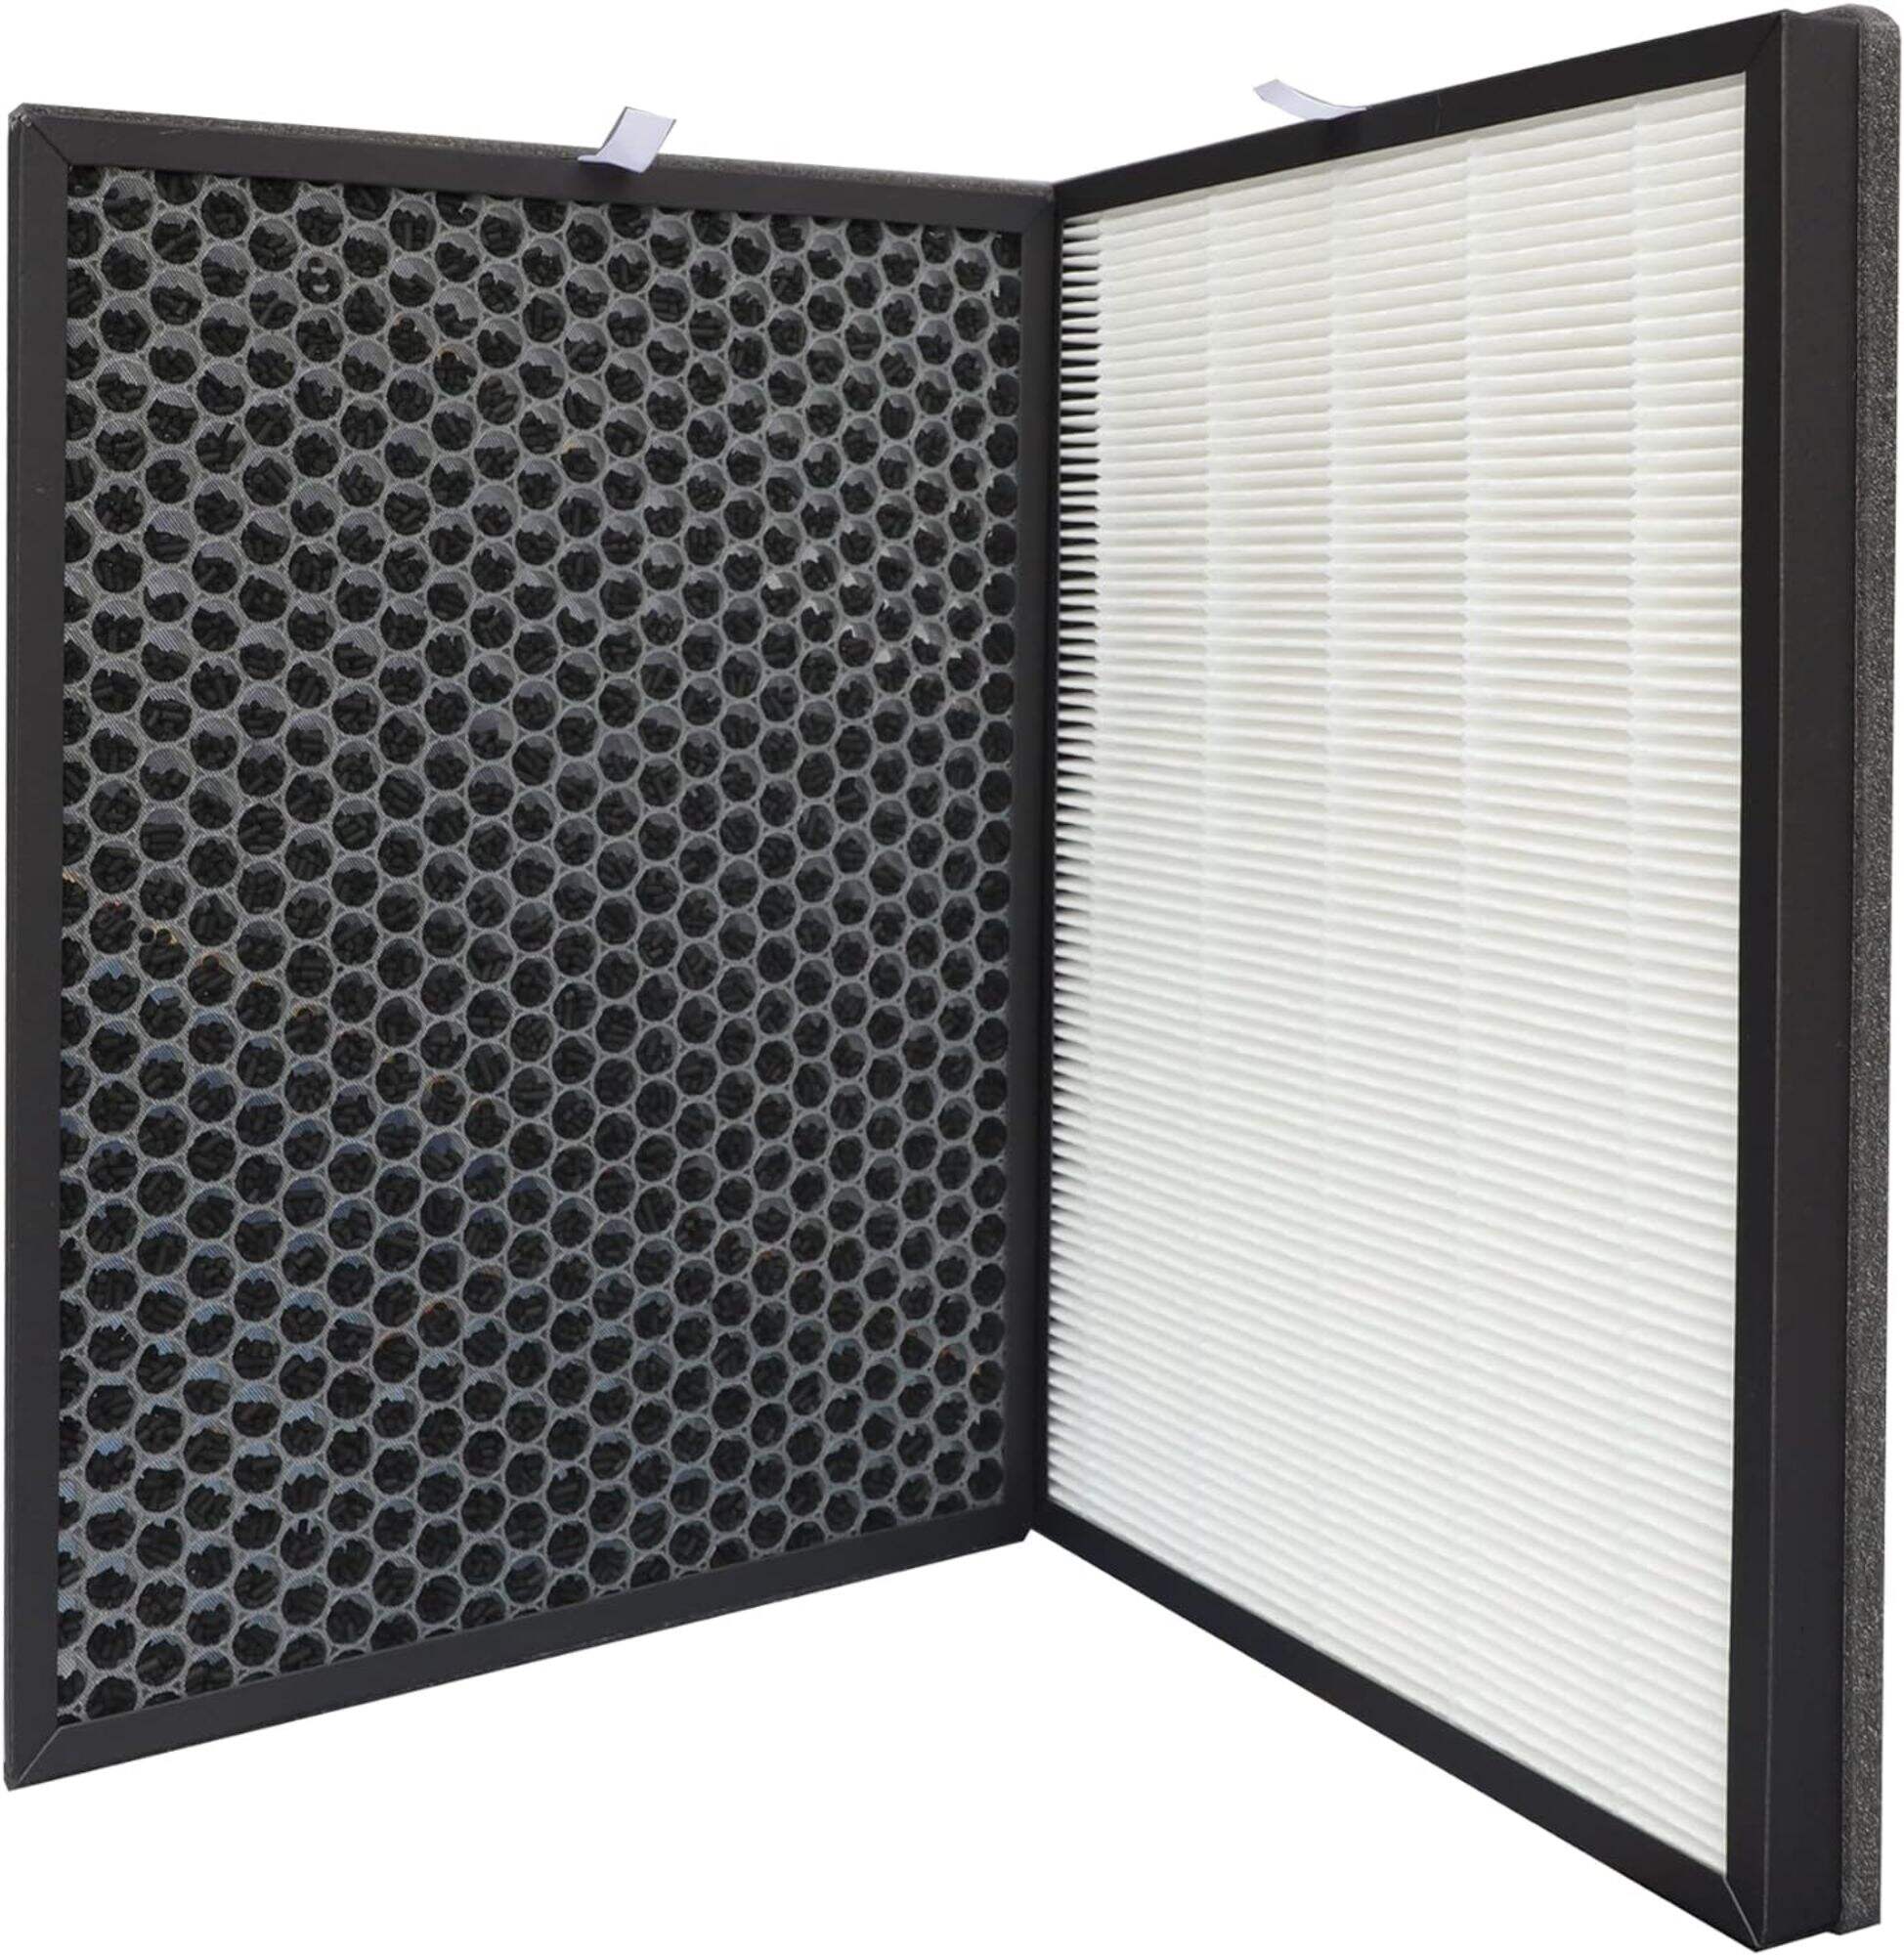  Filter Replacement Compatible with Philips 3000 series Air Purifiers hepa filter